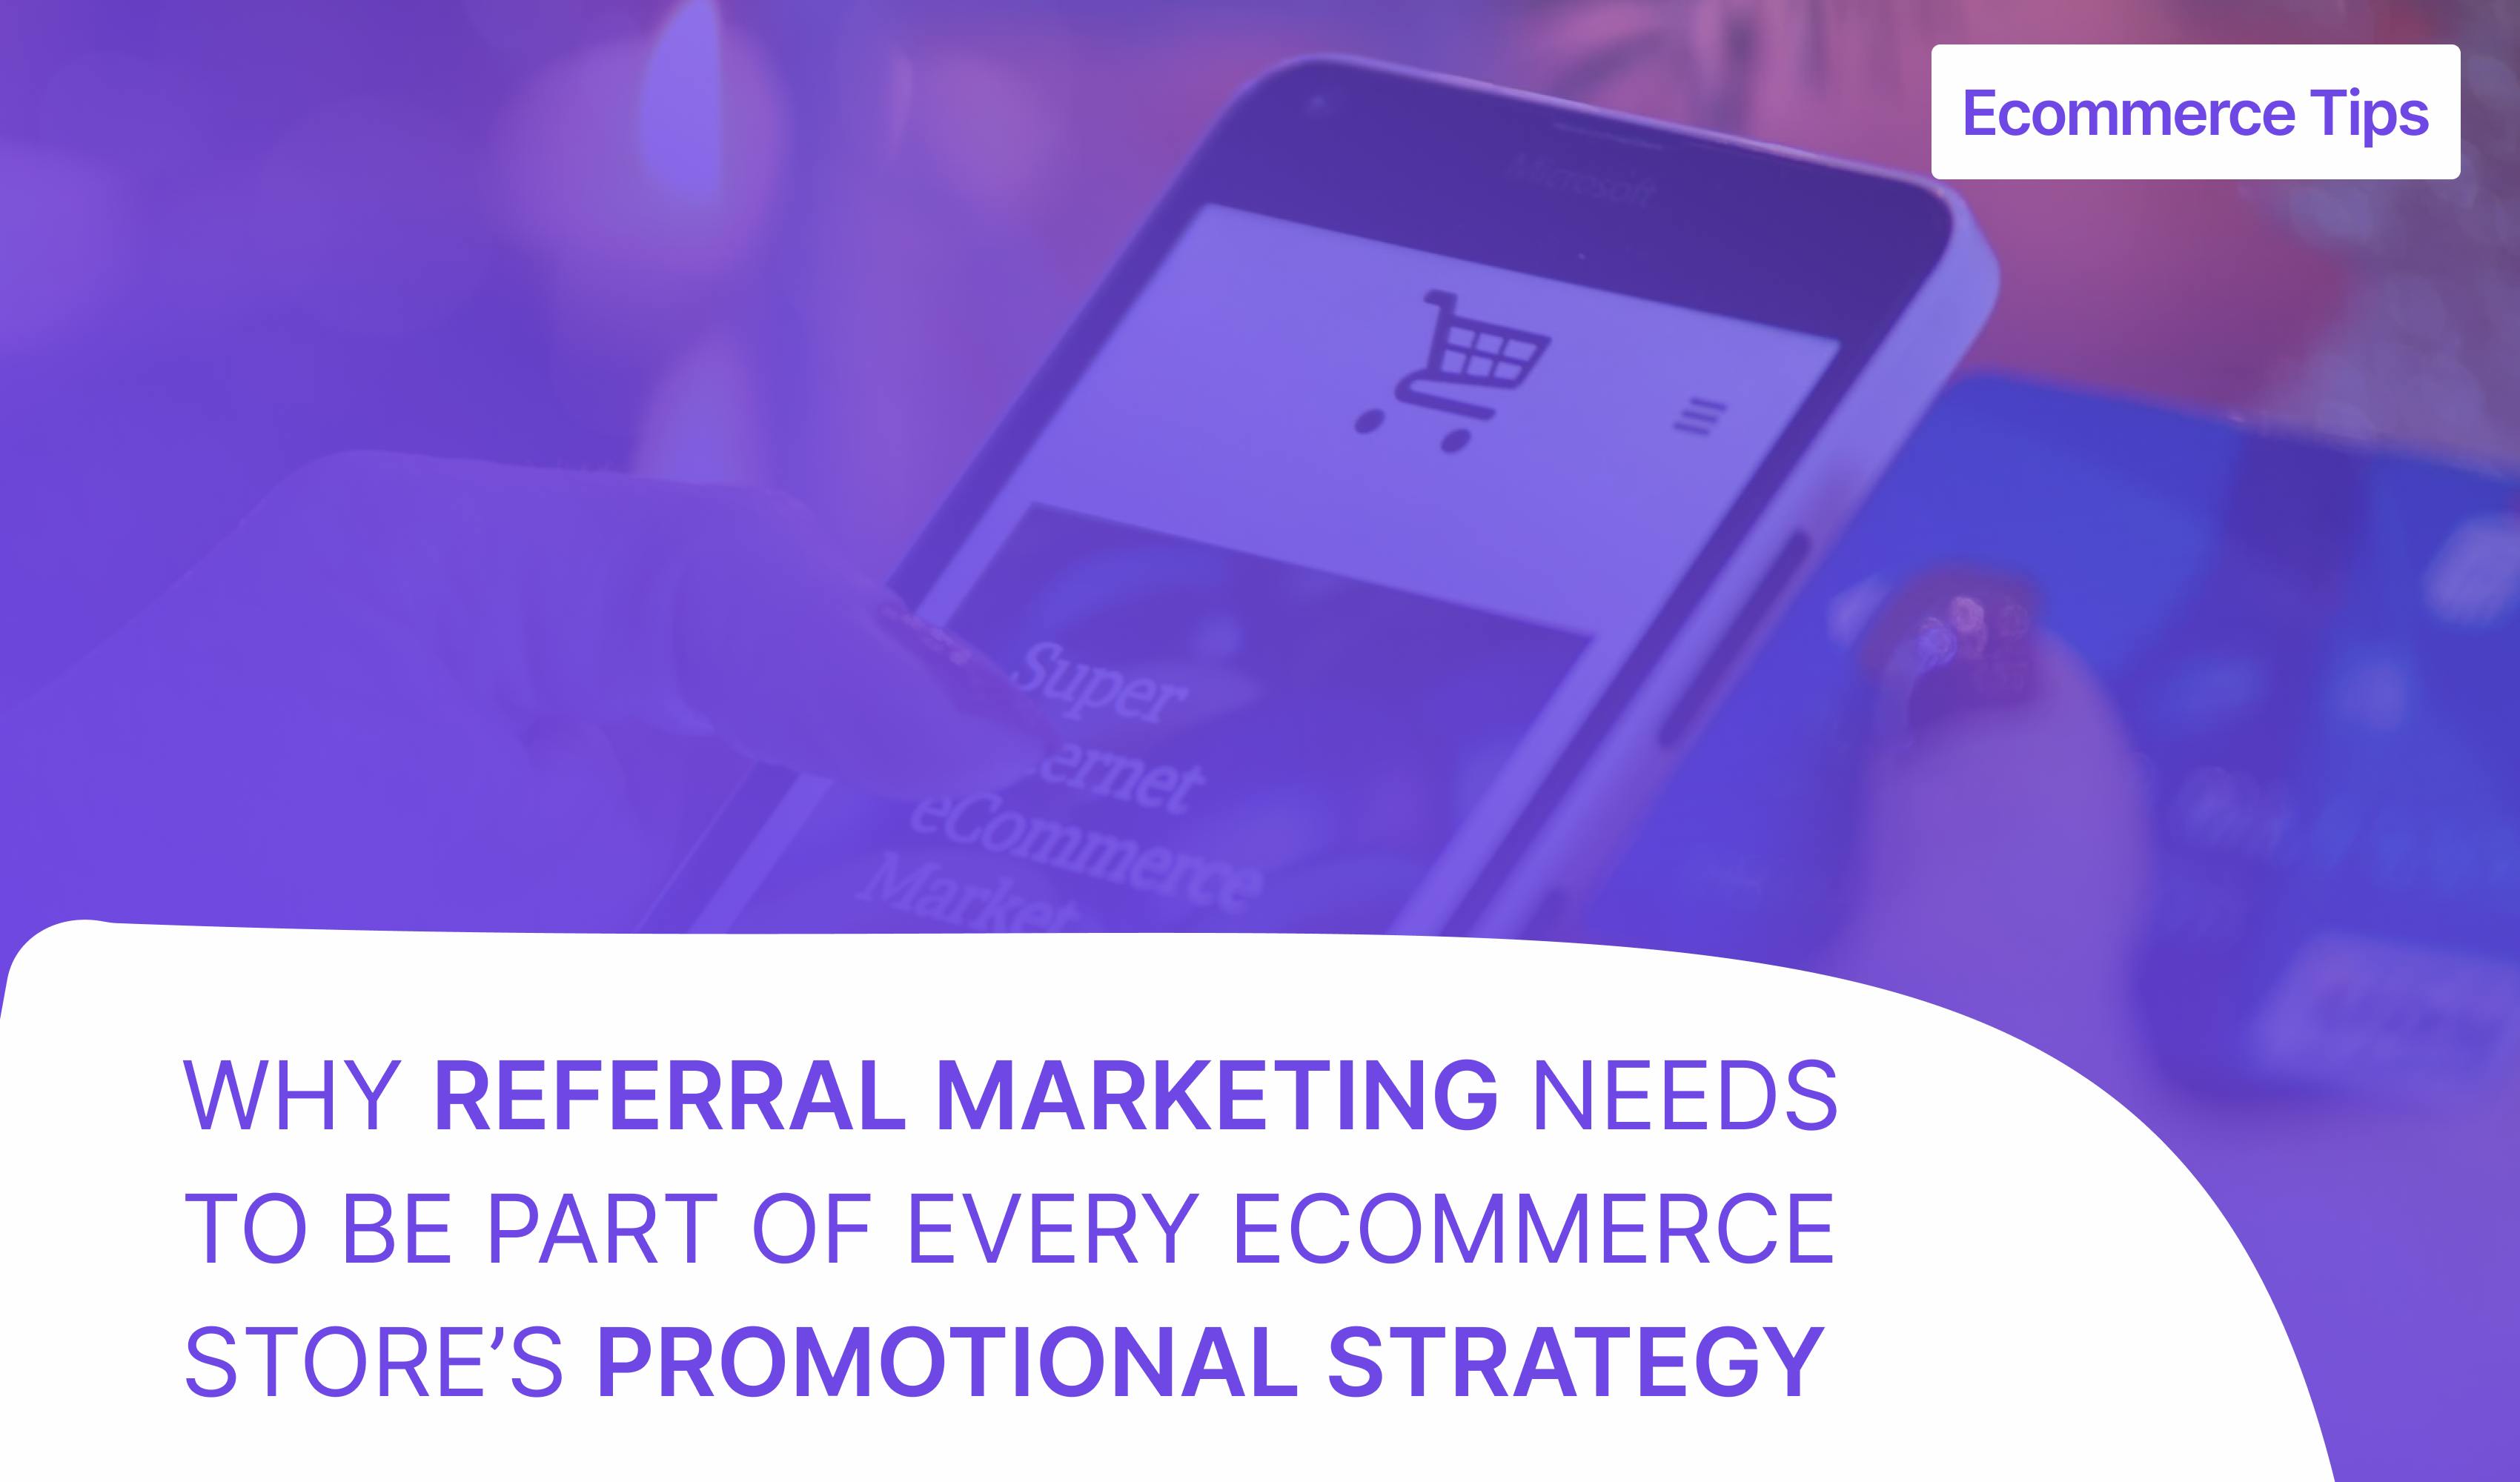  Why Referral Marketing Needs To Be Part Of Every Ecommerce Store’s Promotional Strategy